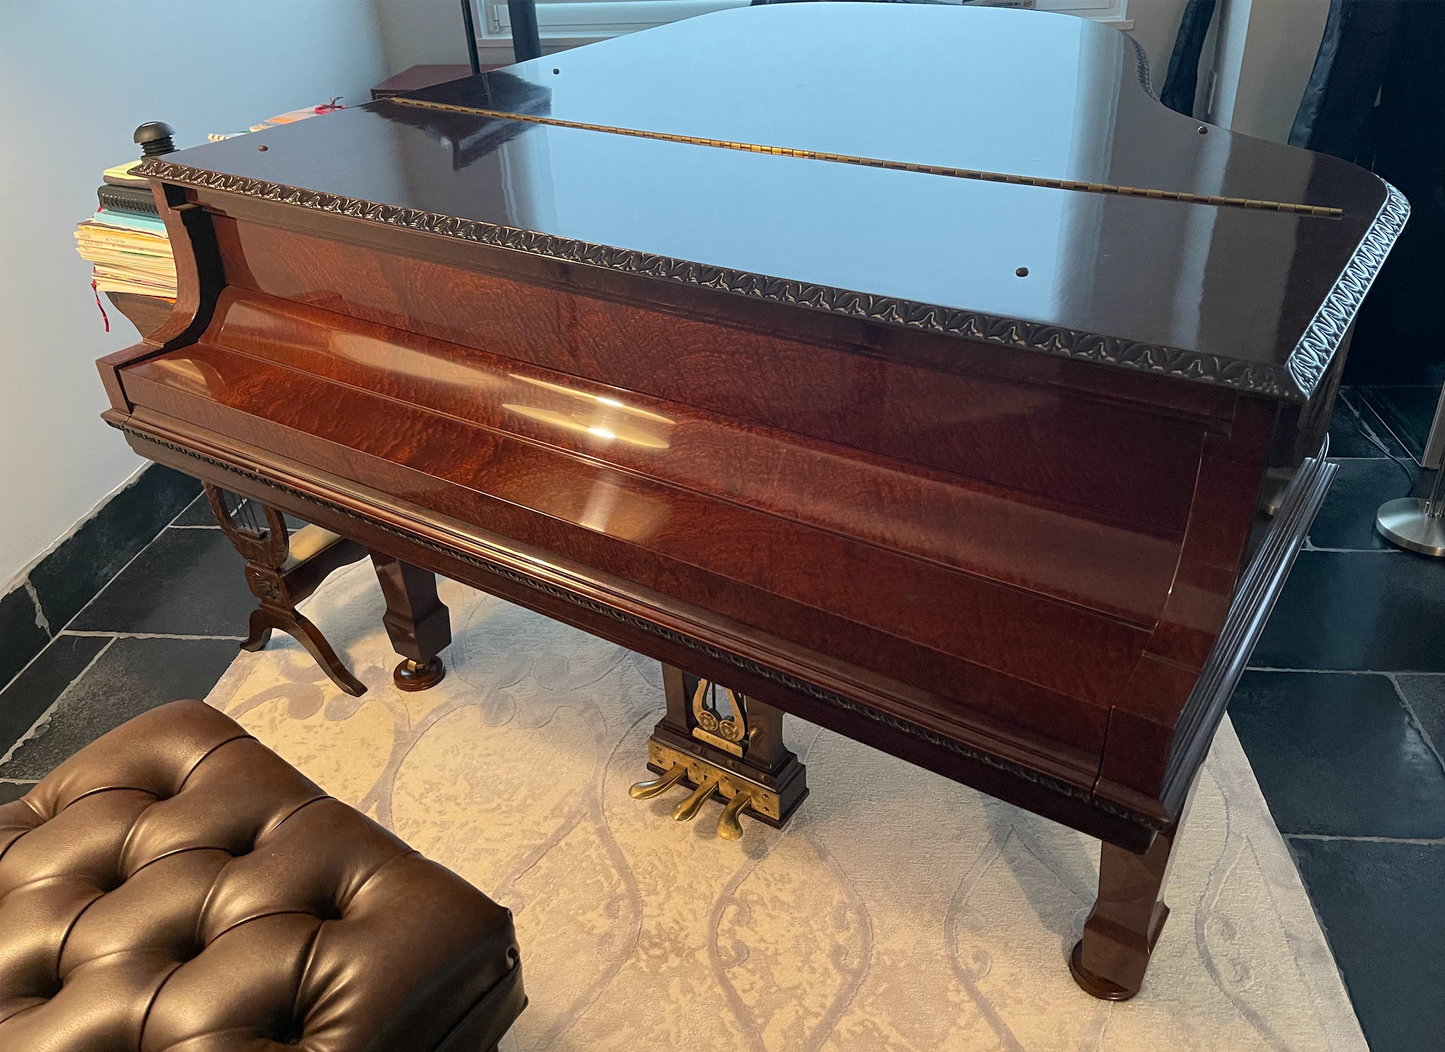 2001 Steinway Grand Piano Model L | Crown Jewel Collection | African Pommele